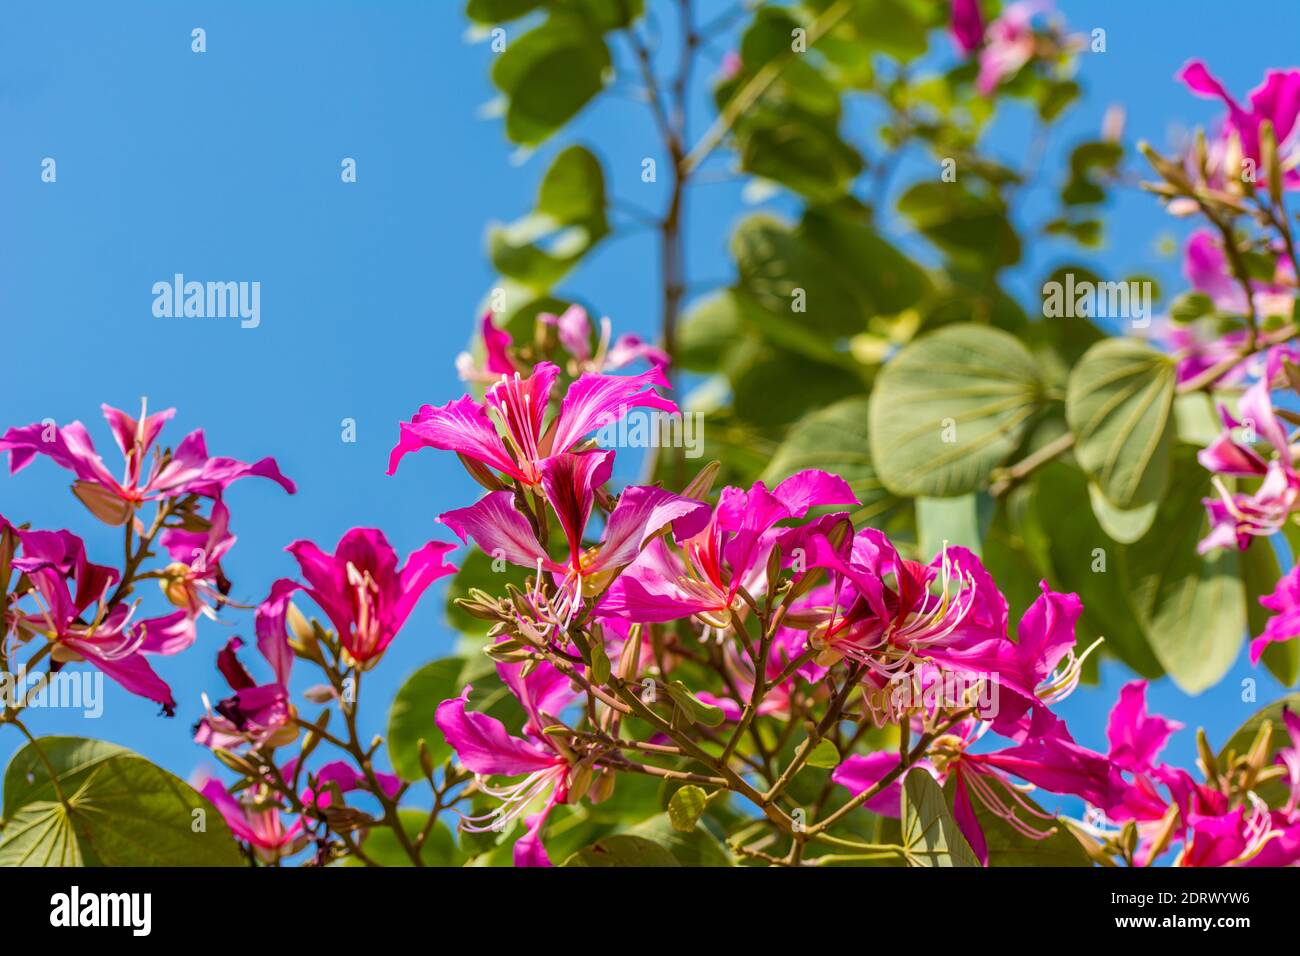 Pink Bauhinia flower blooming, commonly called the Hong Kong Orchid Tree, which is cultivated at the Hong Kong Botanic Gardens and widely planted in H Stock Photo